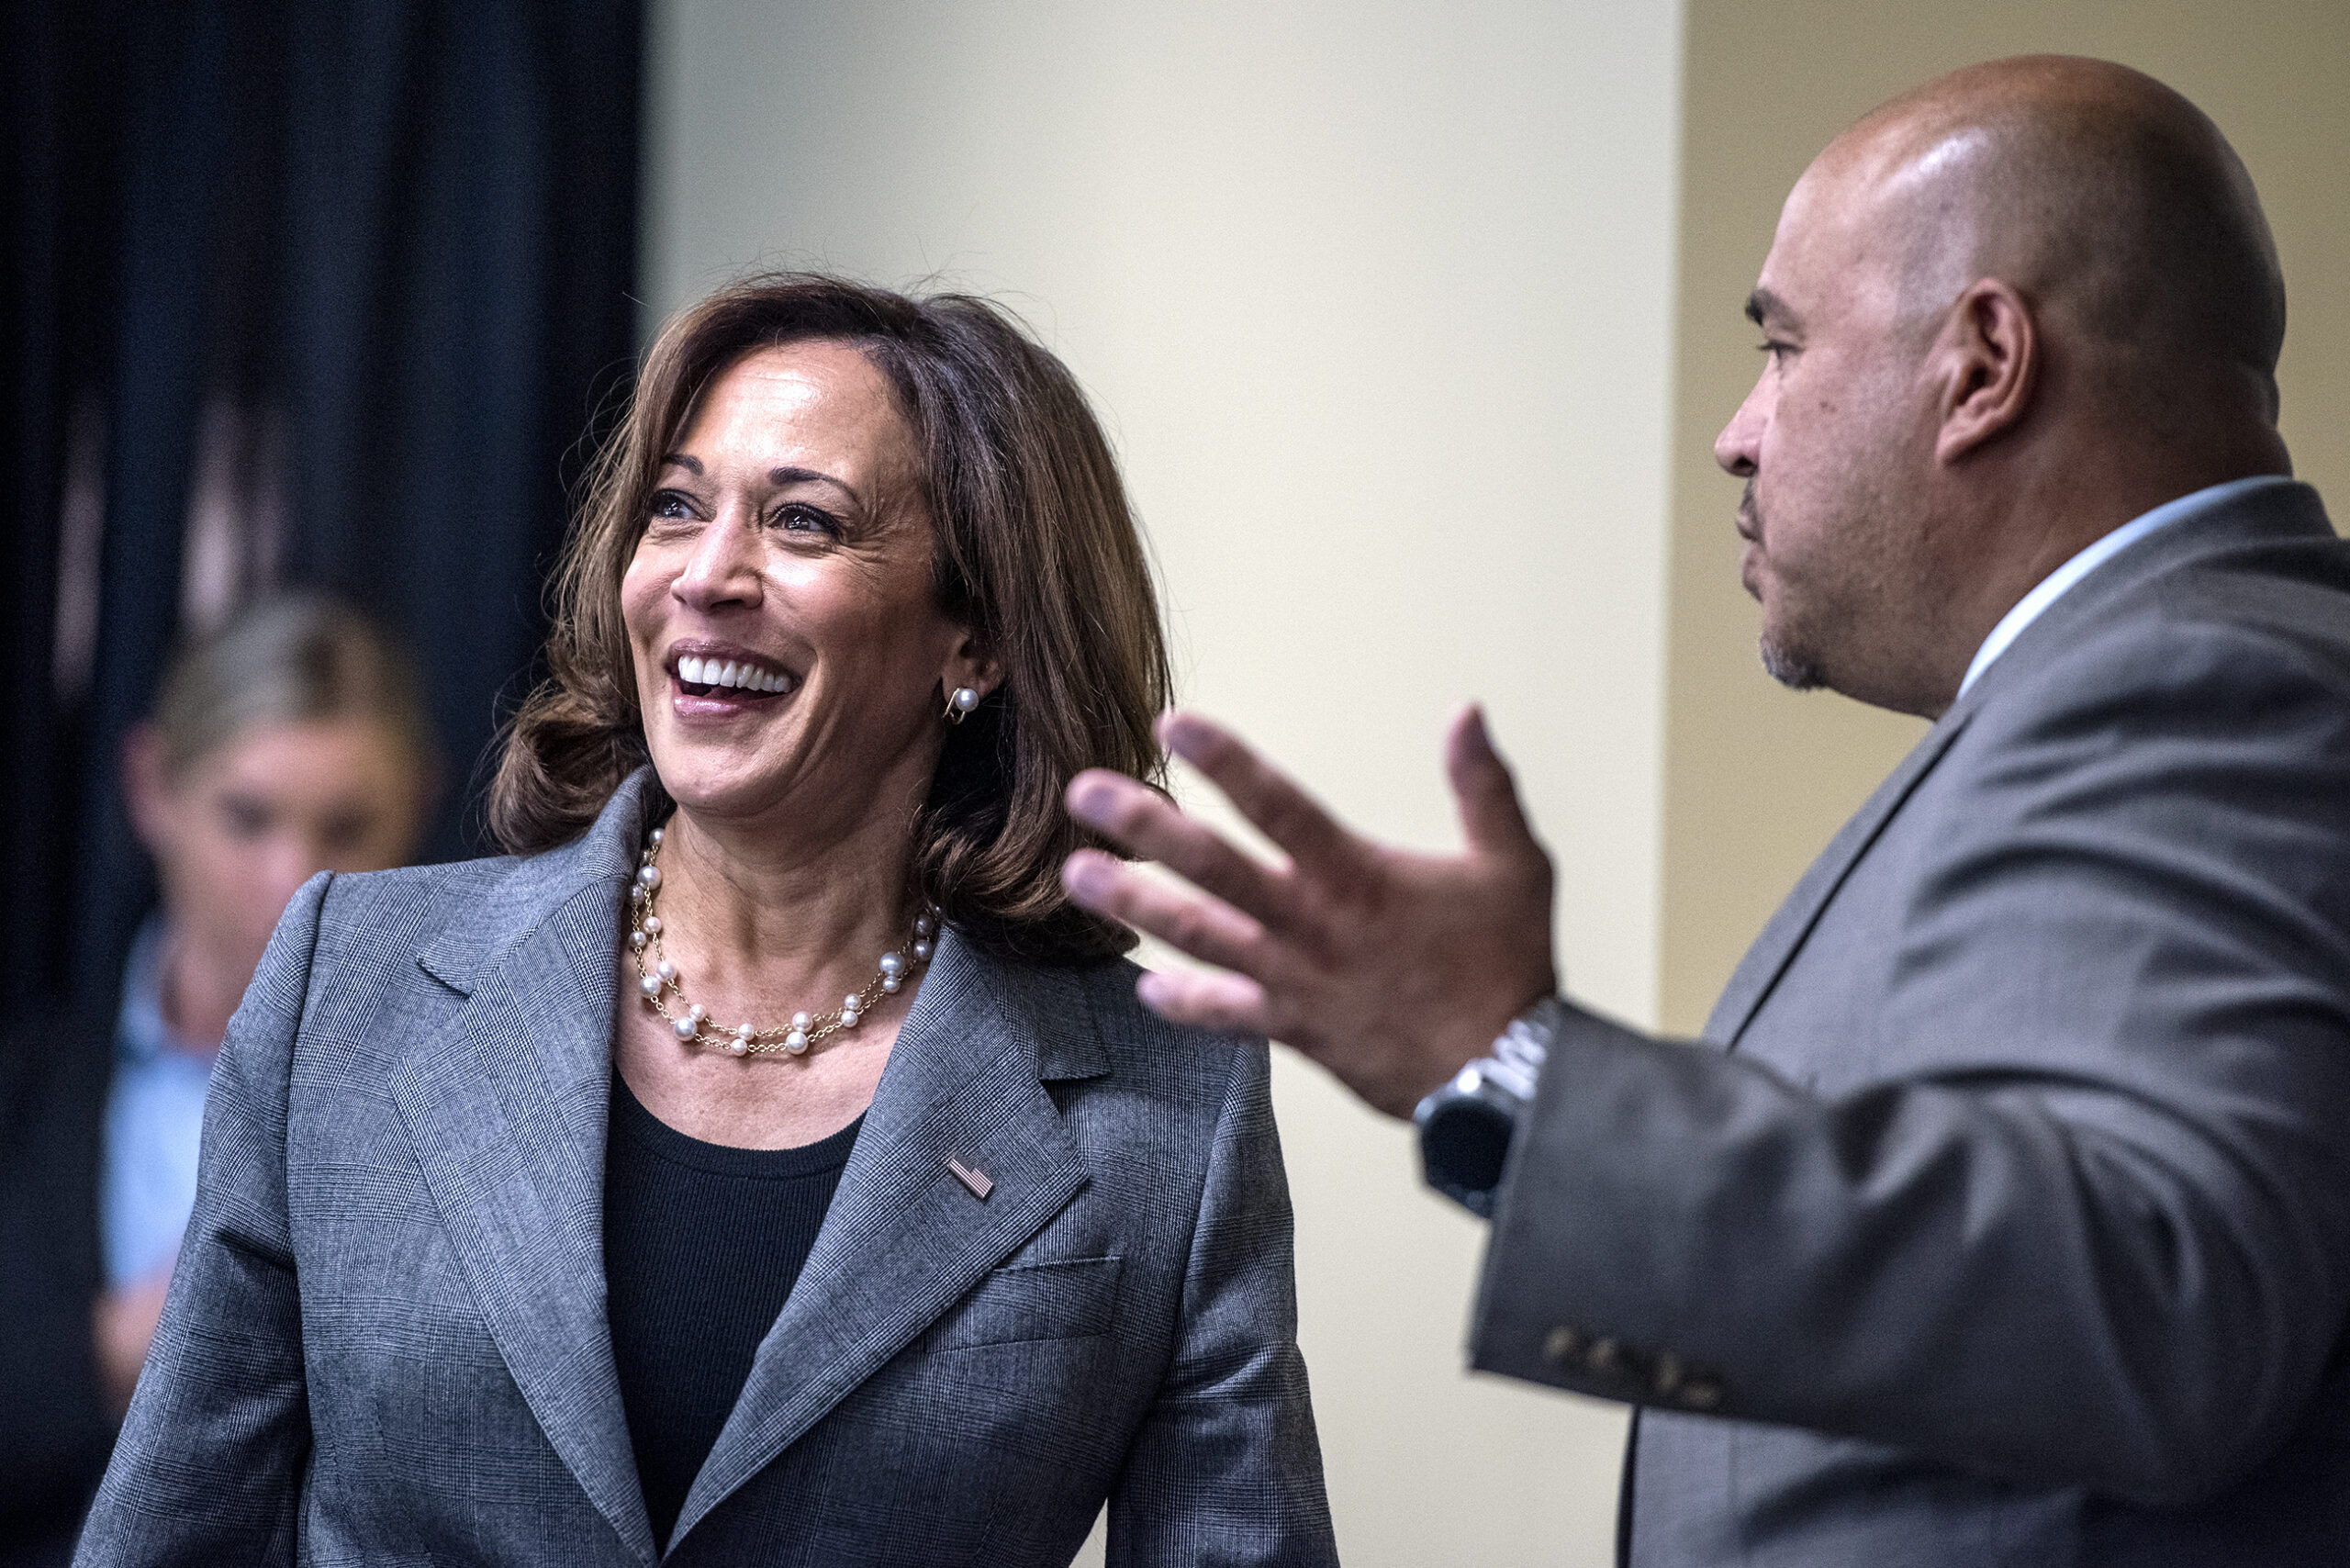 Vice President Kamala Harris speaks about abortion ban, meets with Latino leaders during Milwaukee visit